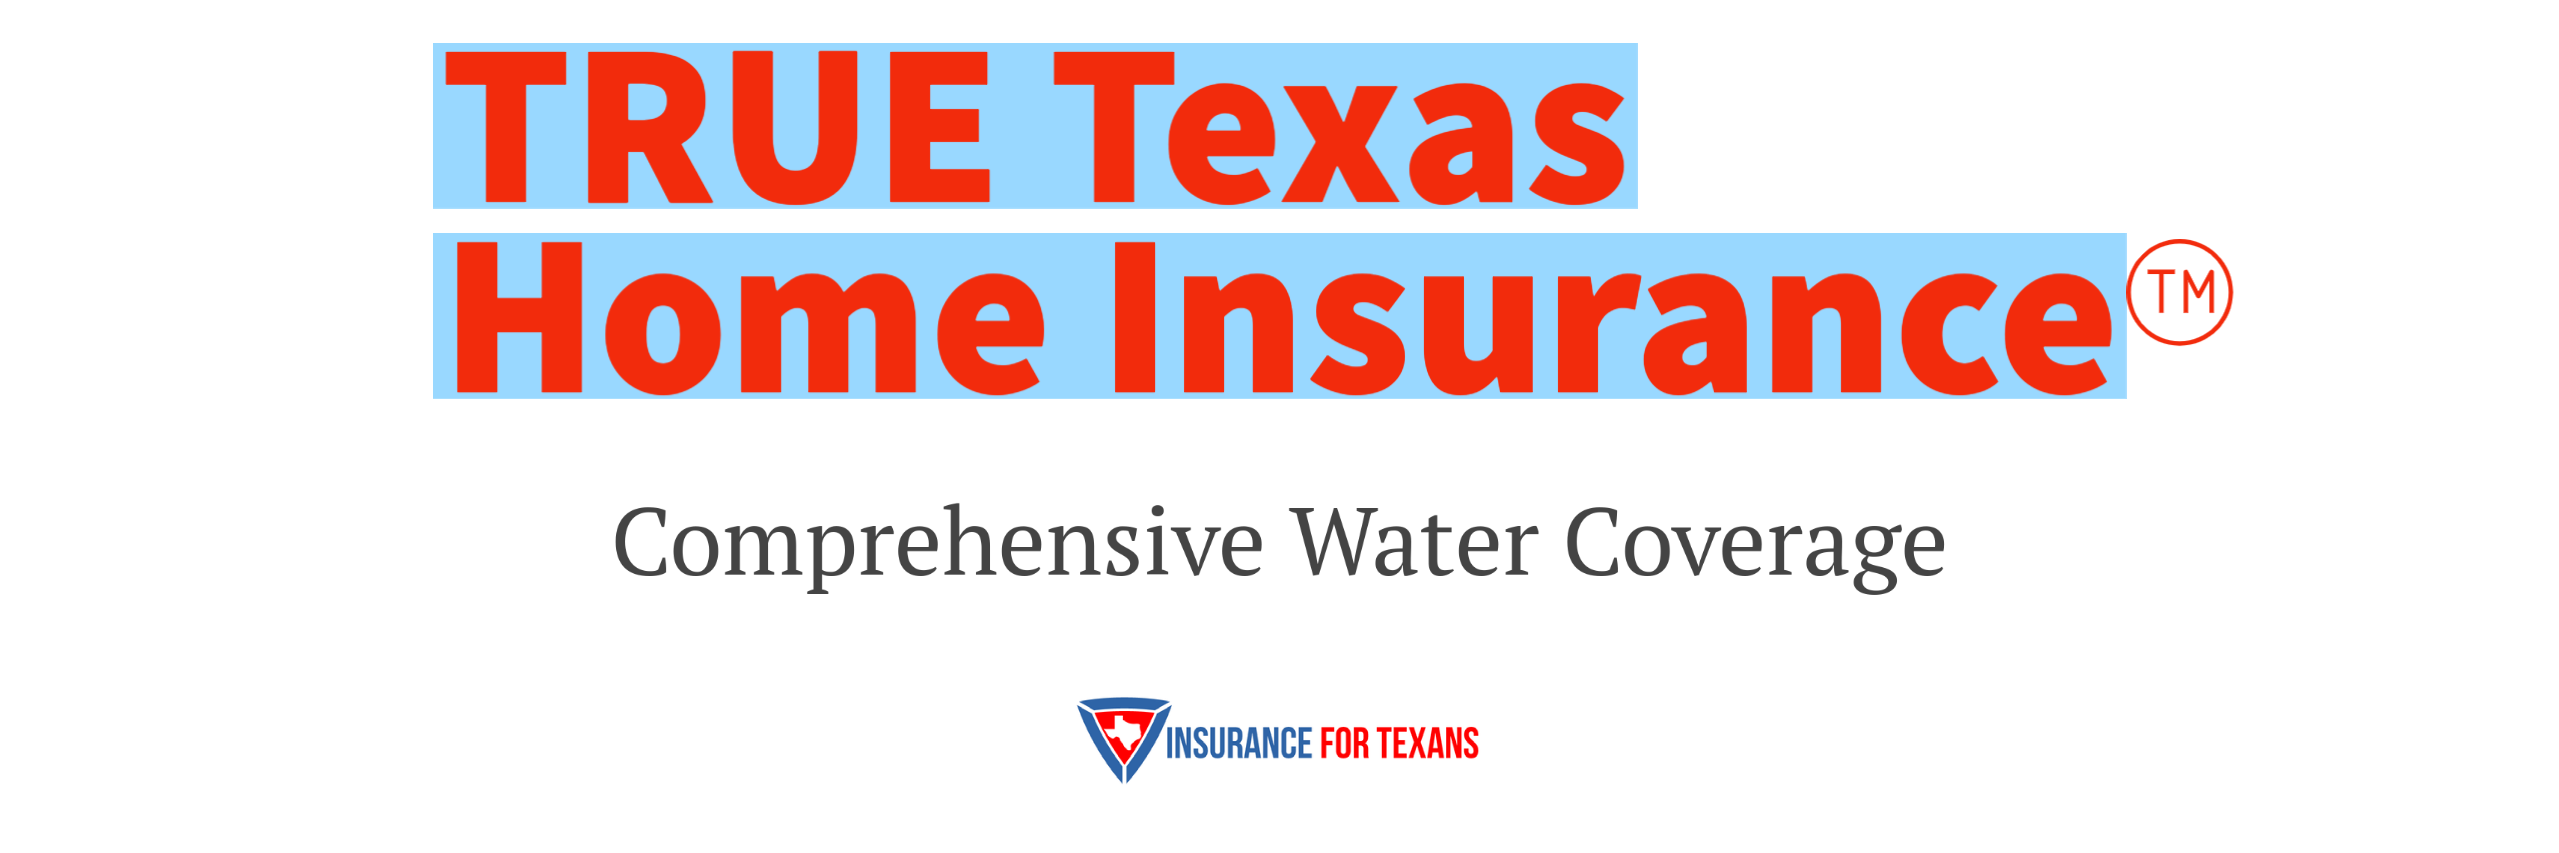 Does Texas Homeowners Insurance Cover Water Damage?